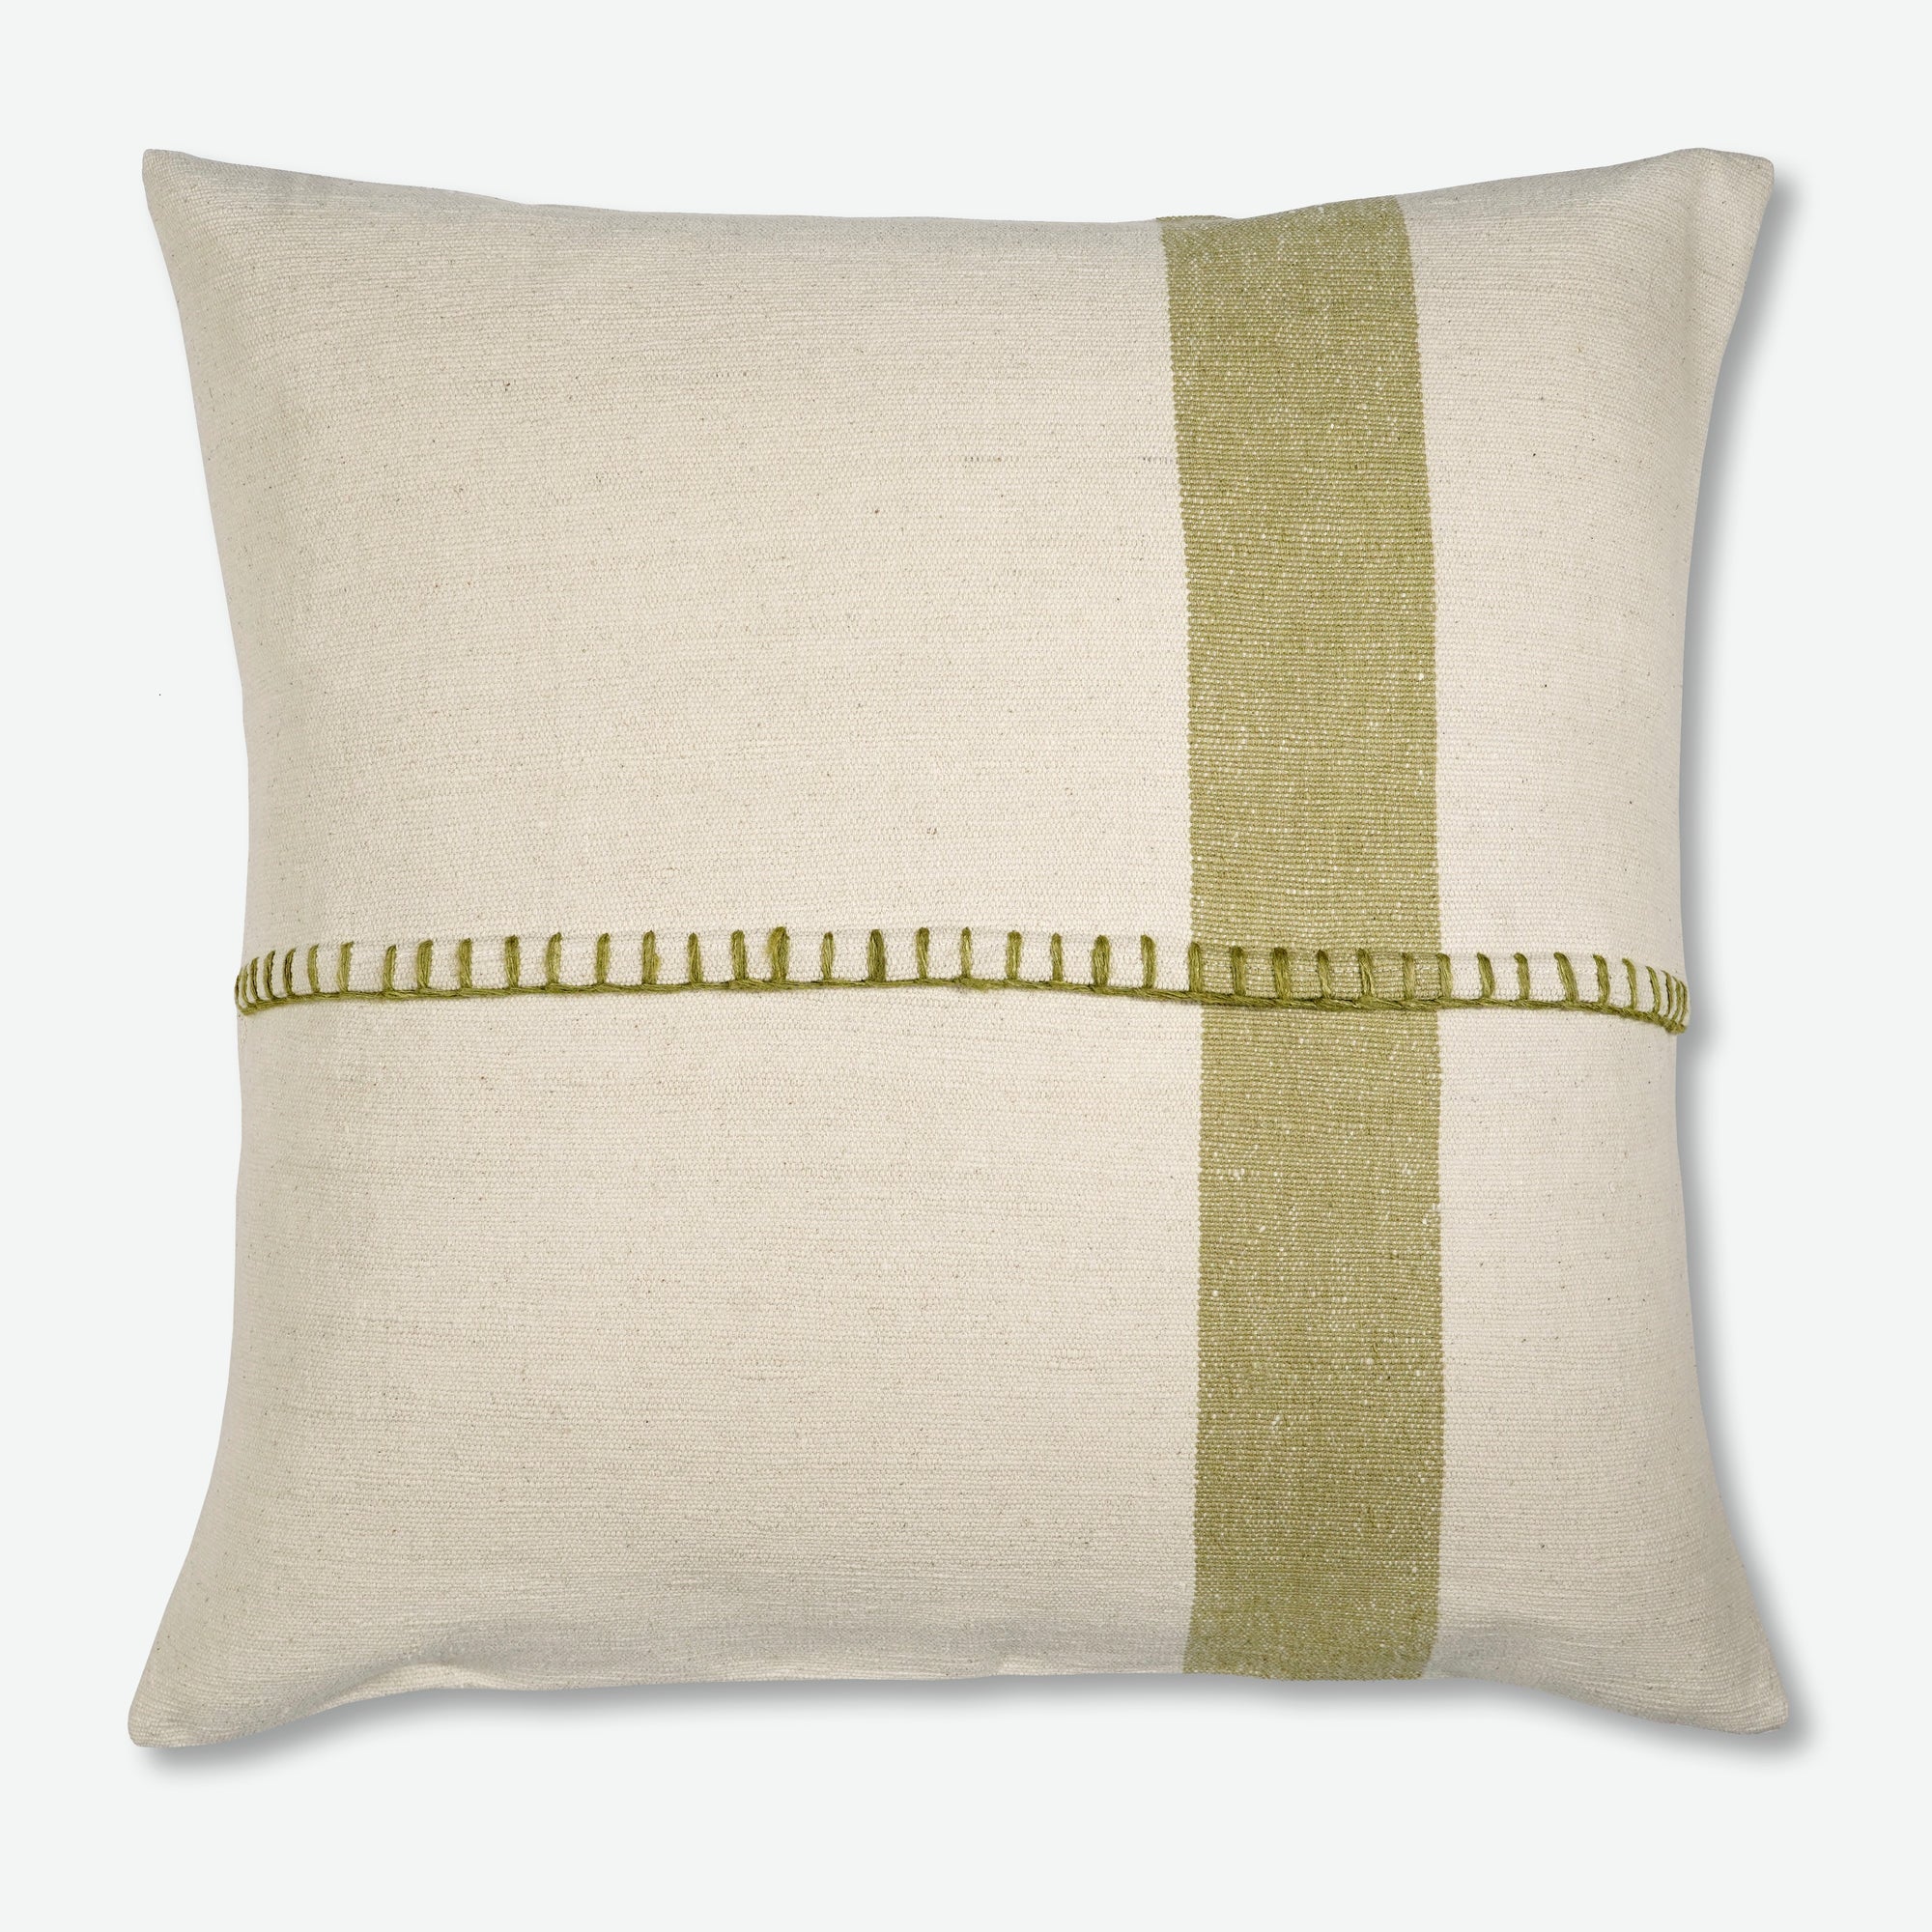 Square throw pillow organic cotton cream with green stripe design handwoven in bhutan from artha collections